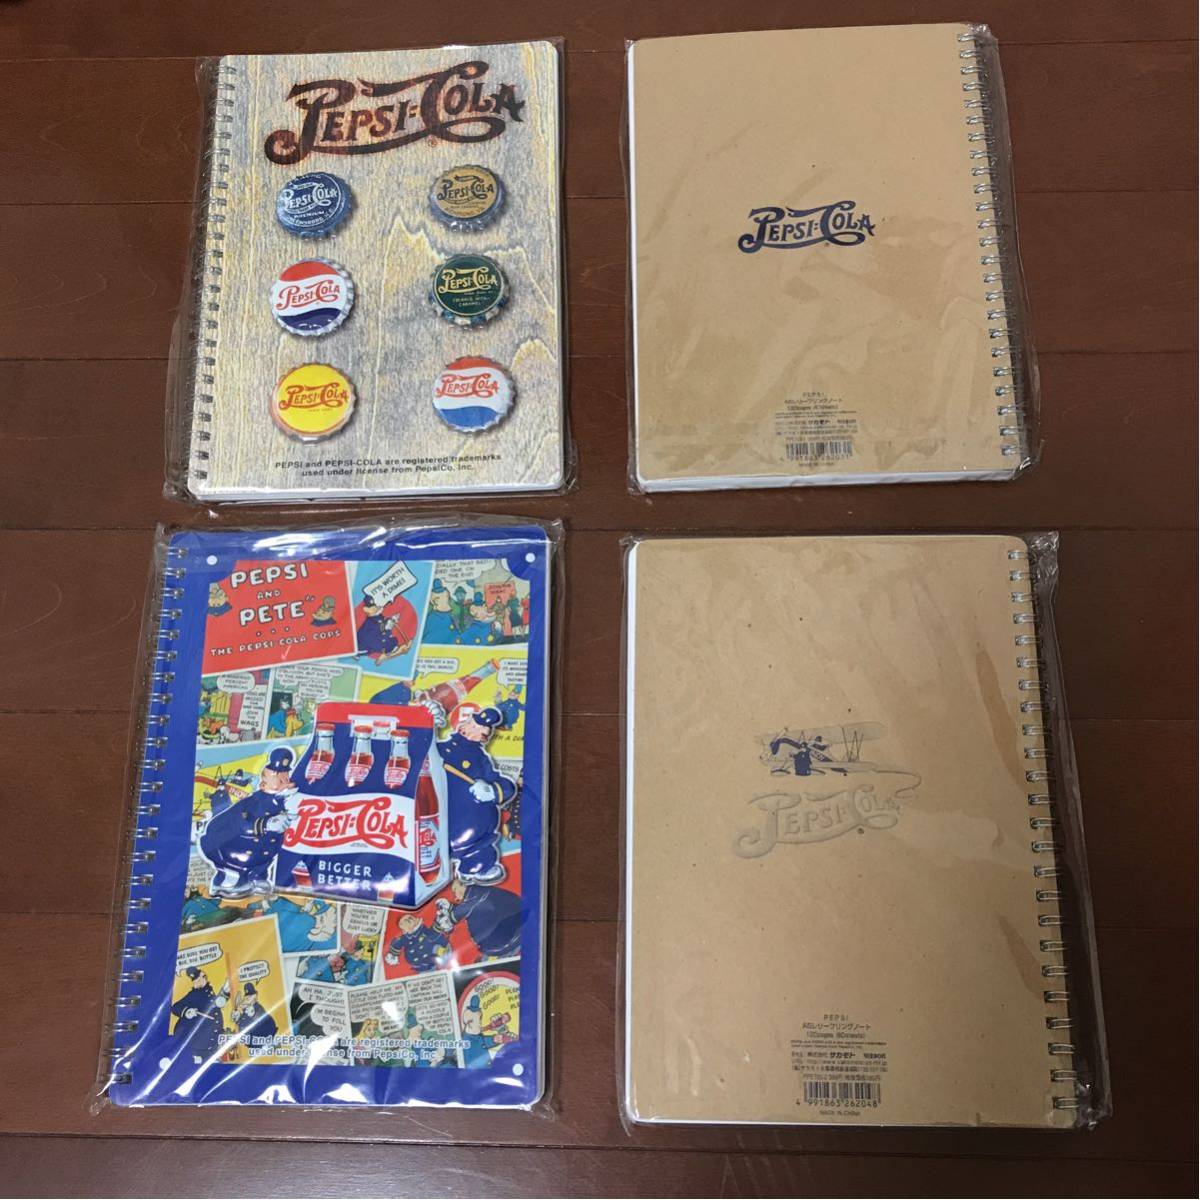  Pepsi ×( stock )saka Moto stationery goods A5 relief ring Note 2 kind ×2 pcs. 